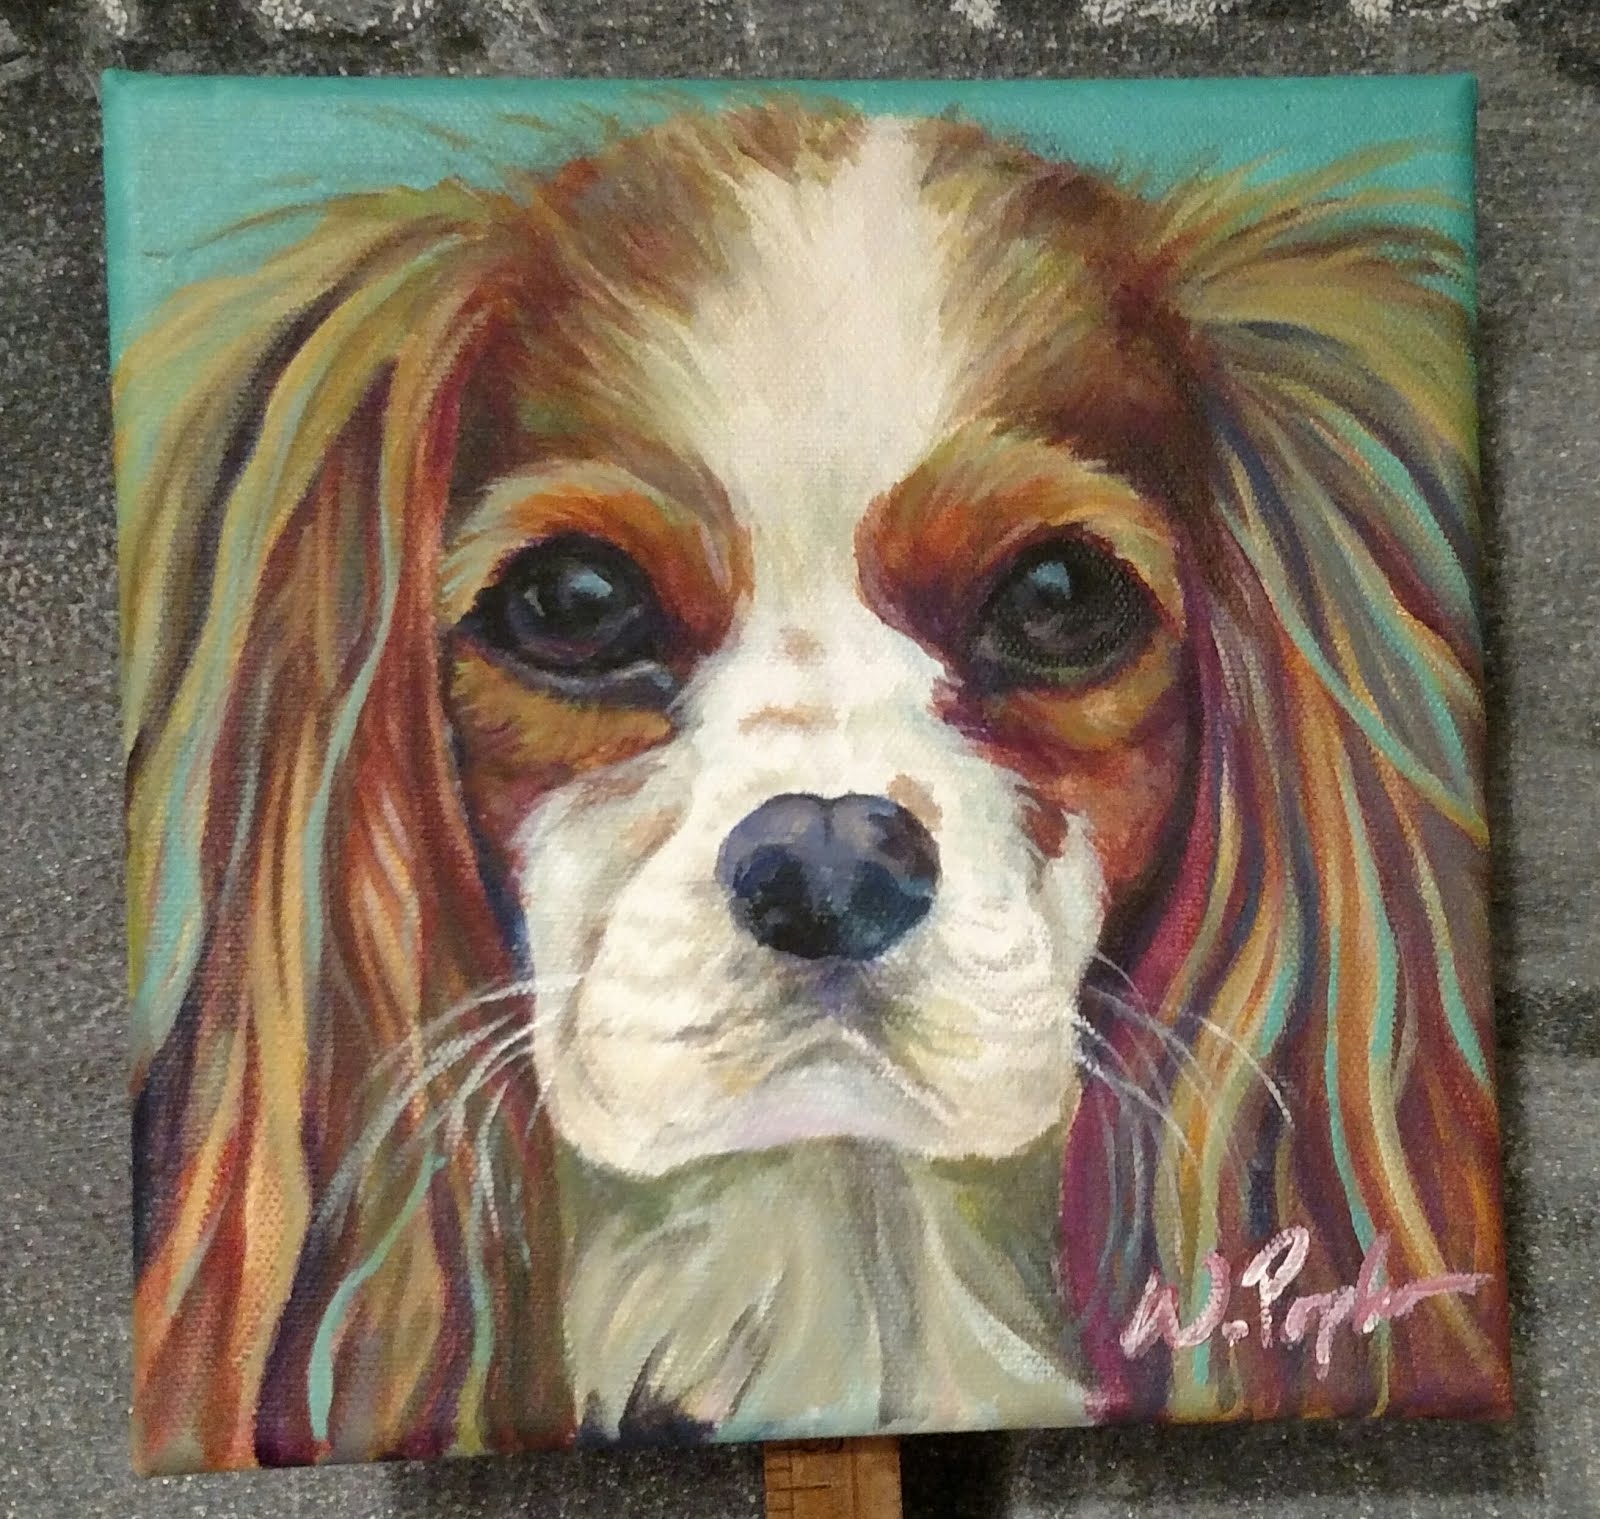 Pet Portrait of a King Charles Spaniel